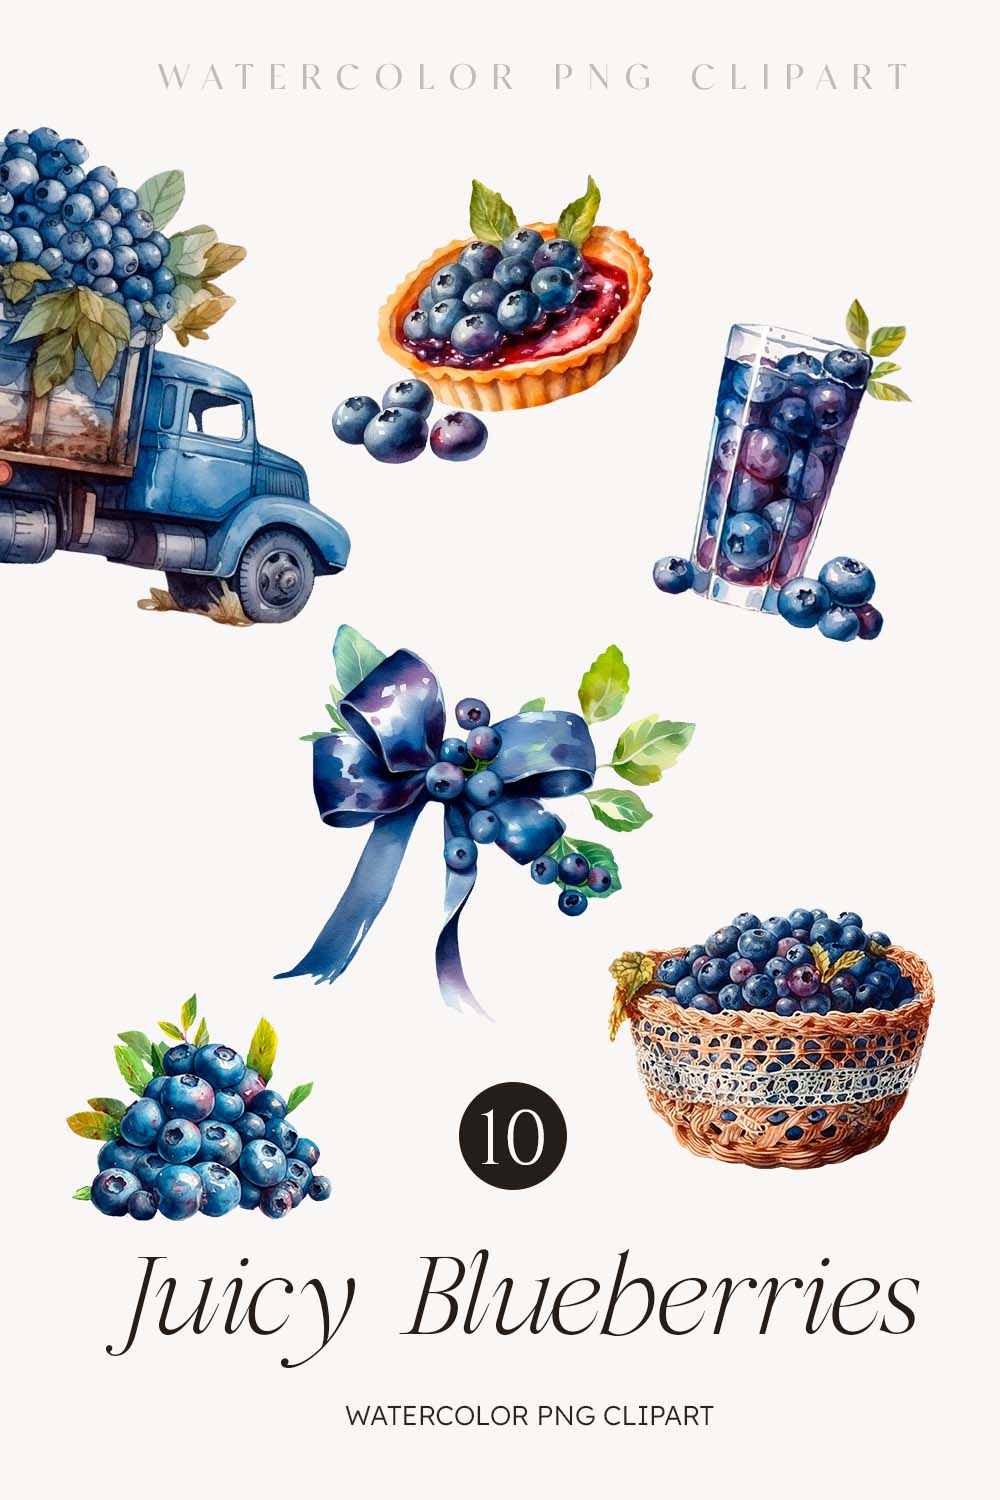 Watercolor Juicy Blueberry Clipart - 10 items in PNG Digital: a blueberry smoothie, three blueberry tarts, a blueberry cupcake, a stack of blueberries, a blueberry ice cream, a basket of fresh picked blueberries and a blue pick up truck with a tray full of blueberries pinterest preview image.